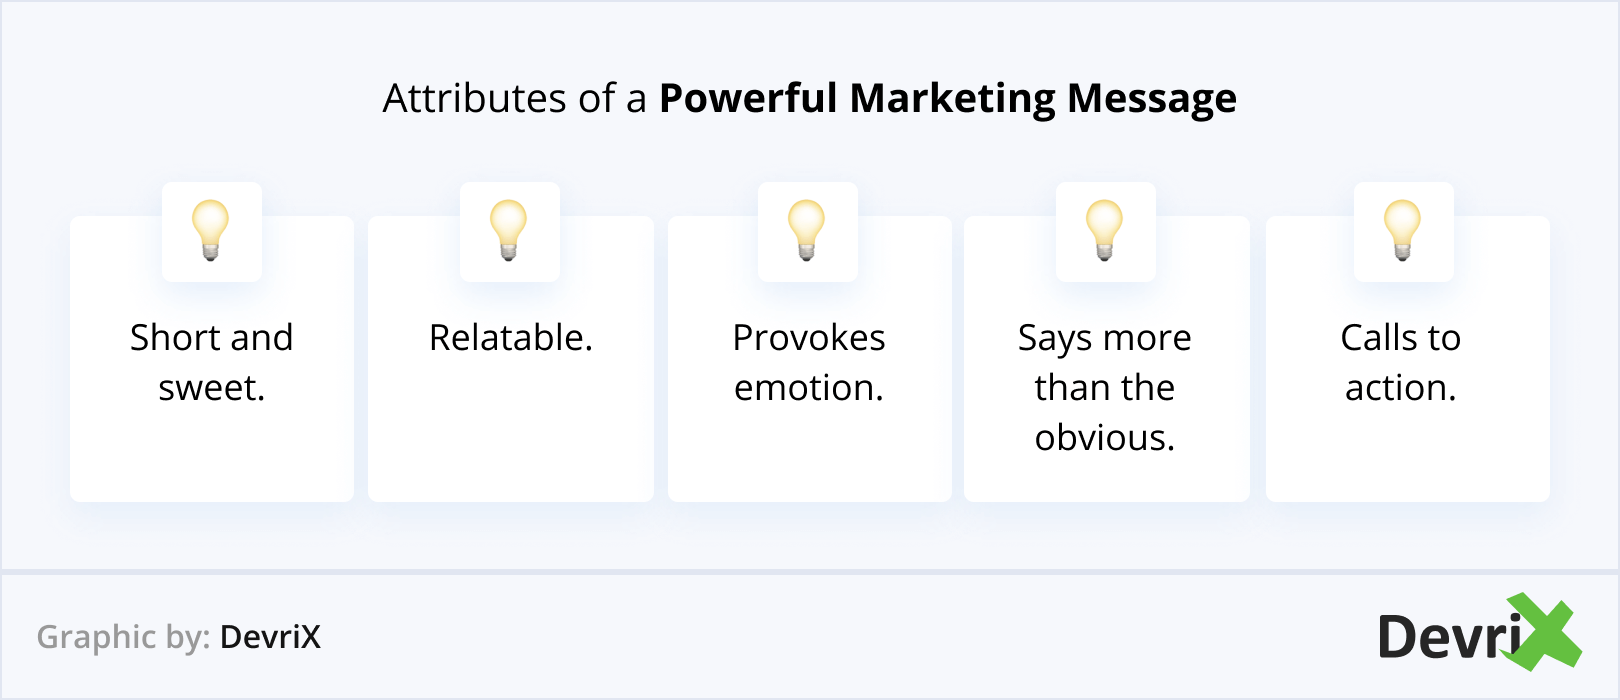 Attributes of a Powerful Marketing Message